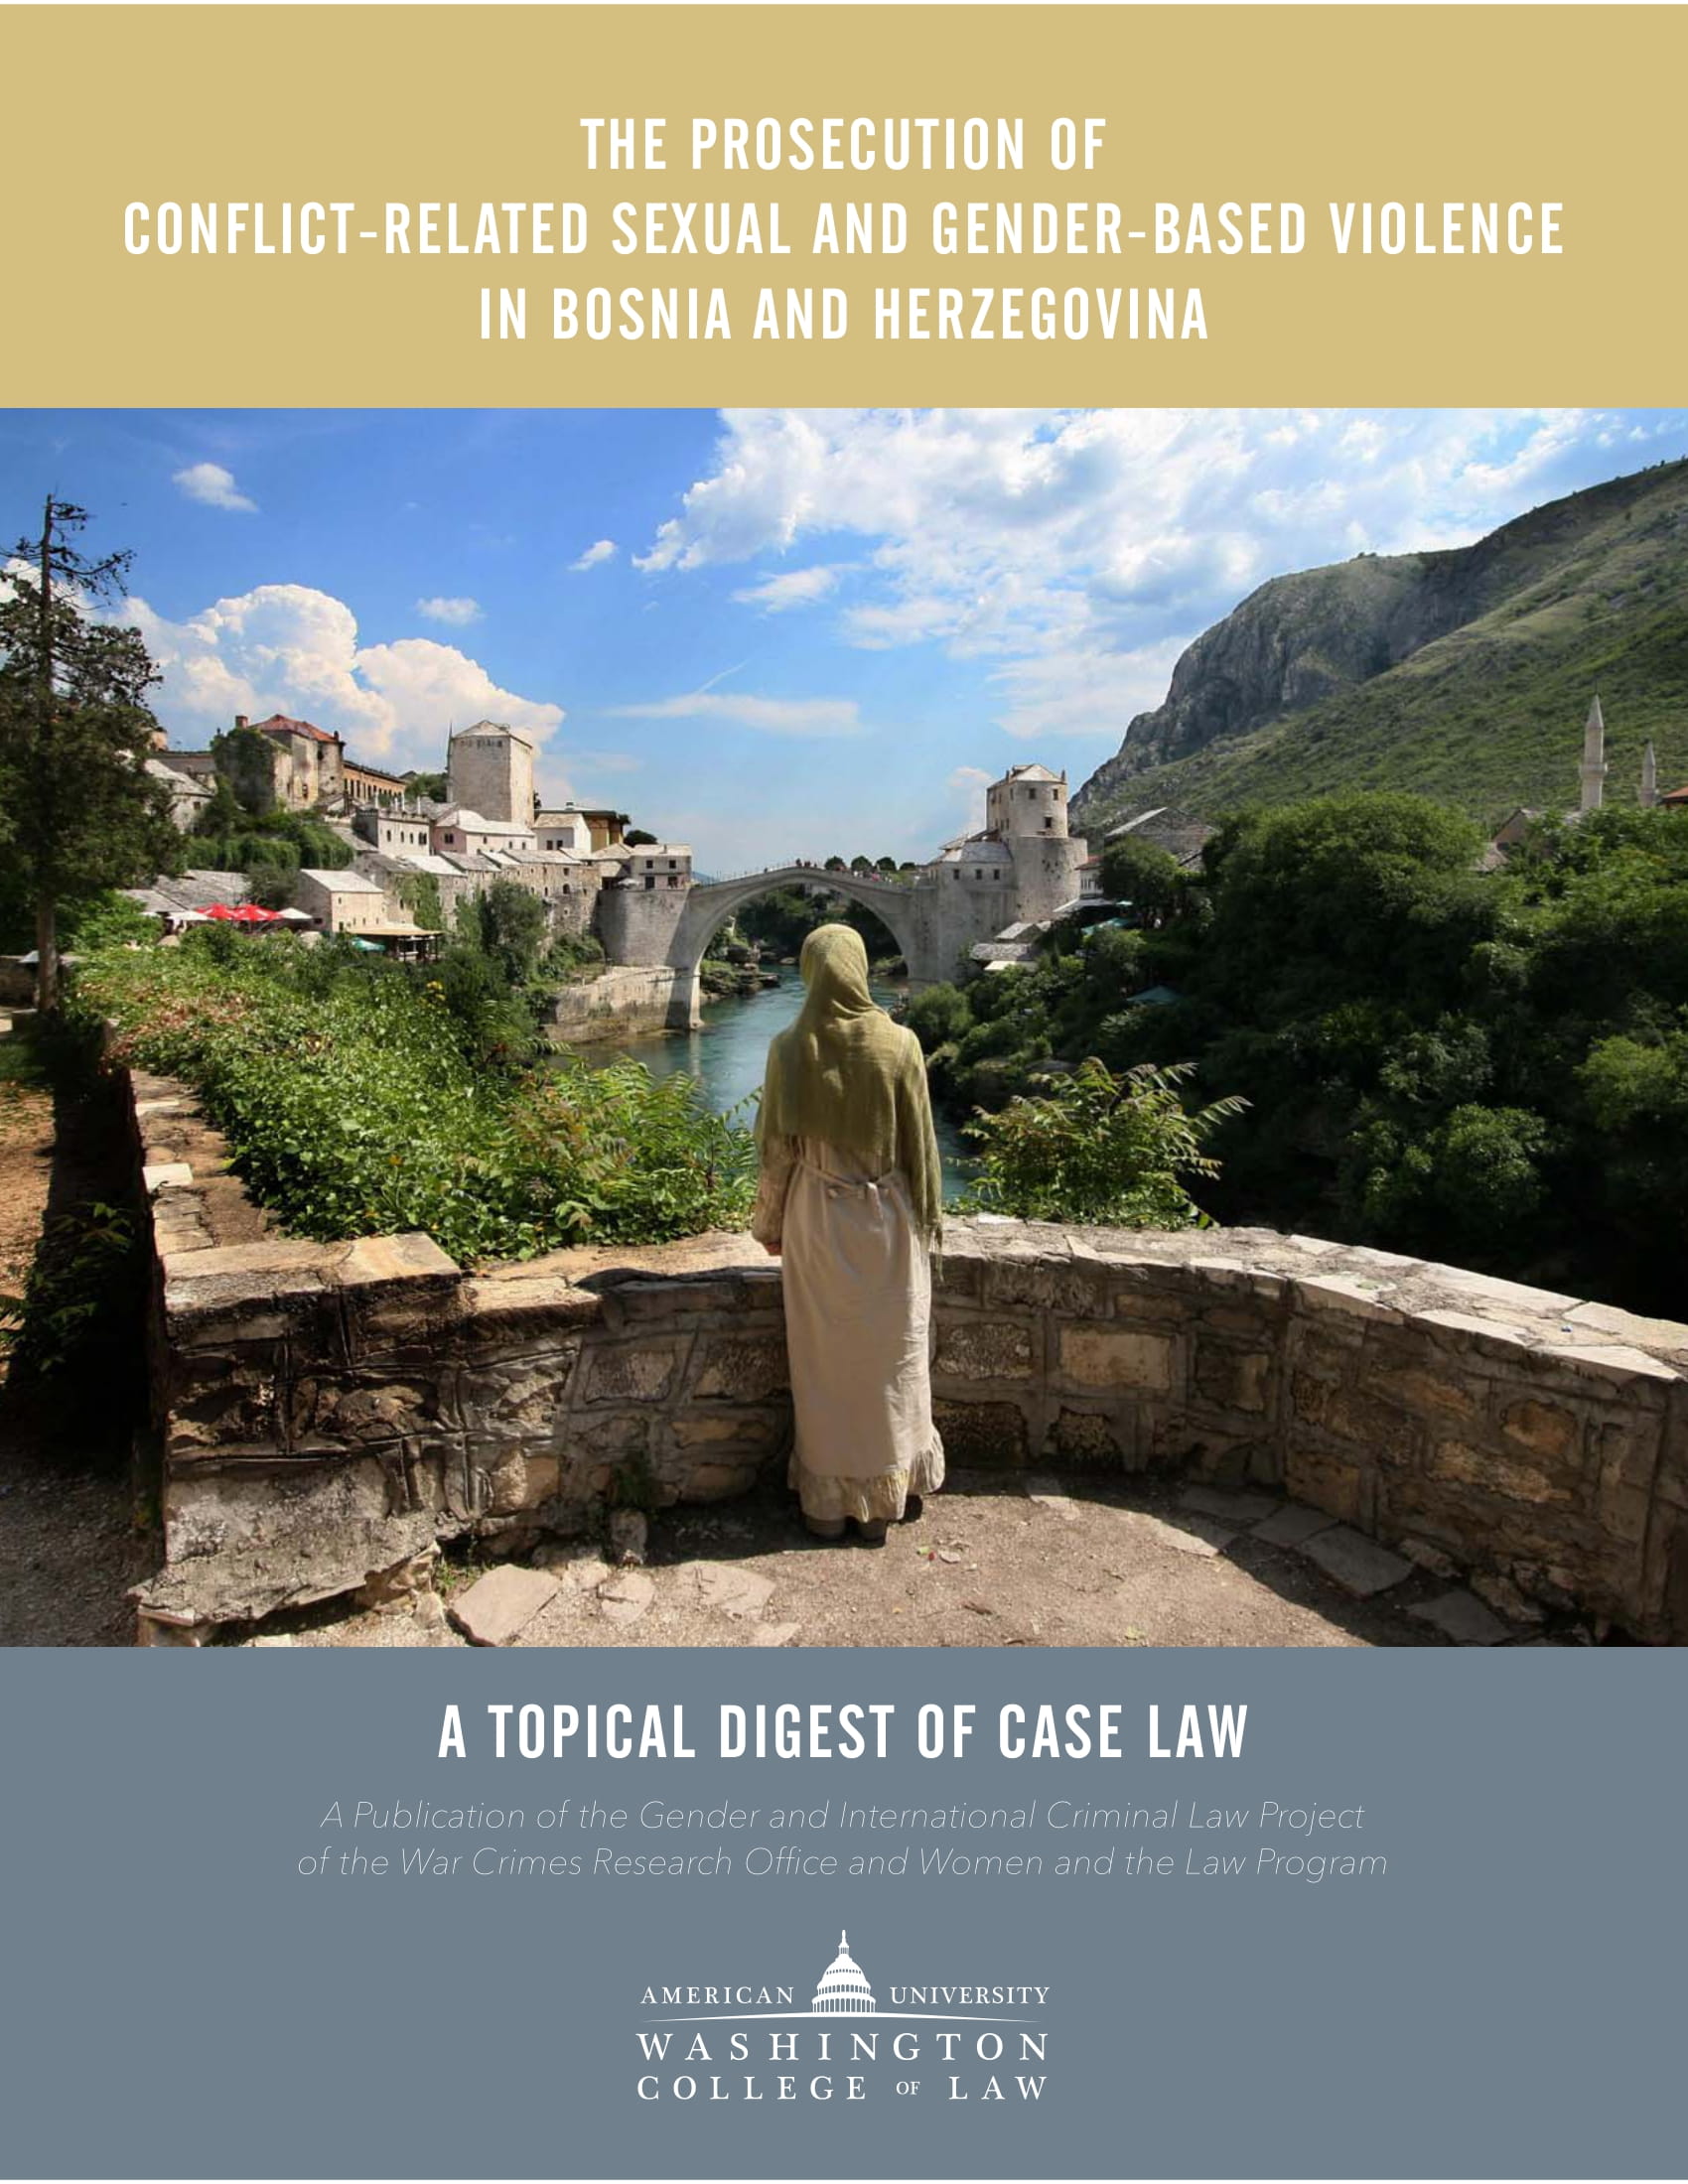 A Topical Digest of Case Law: The Prosecution of Conflict-Related Sexual and Gender-Based Violence in Bosnia and Herzegovina (English)